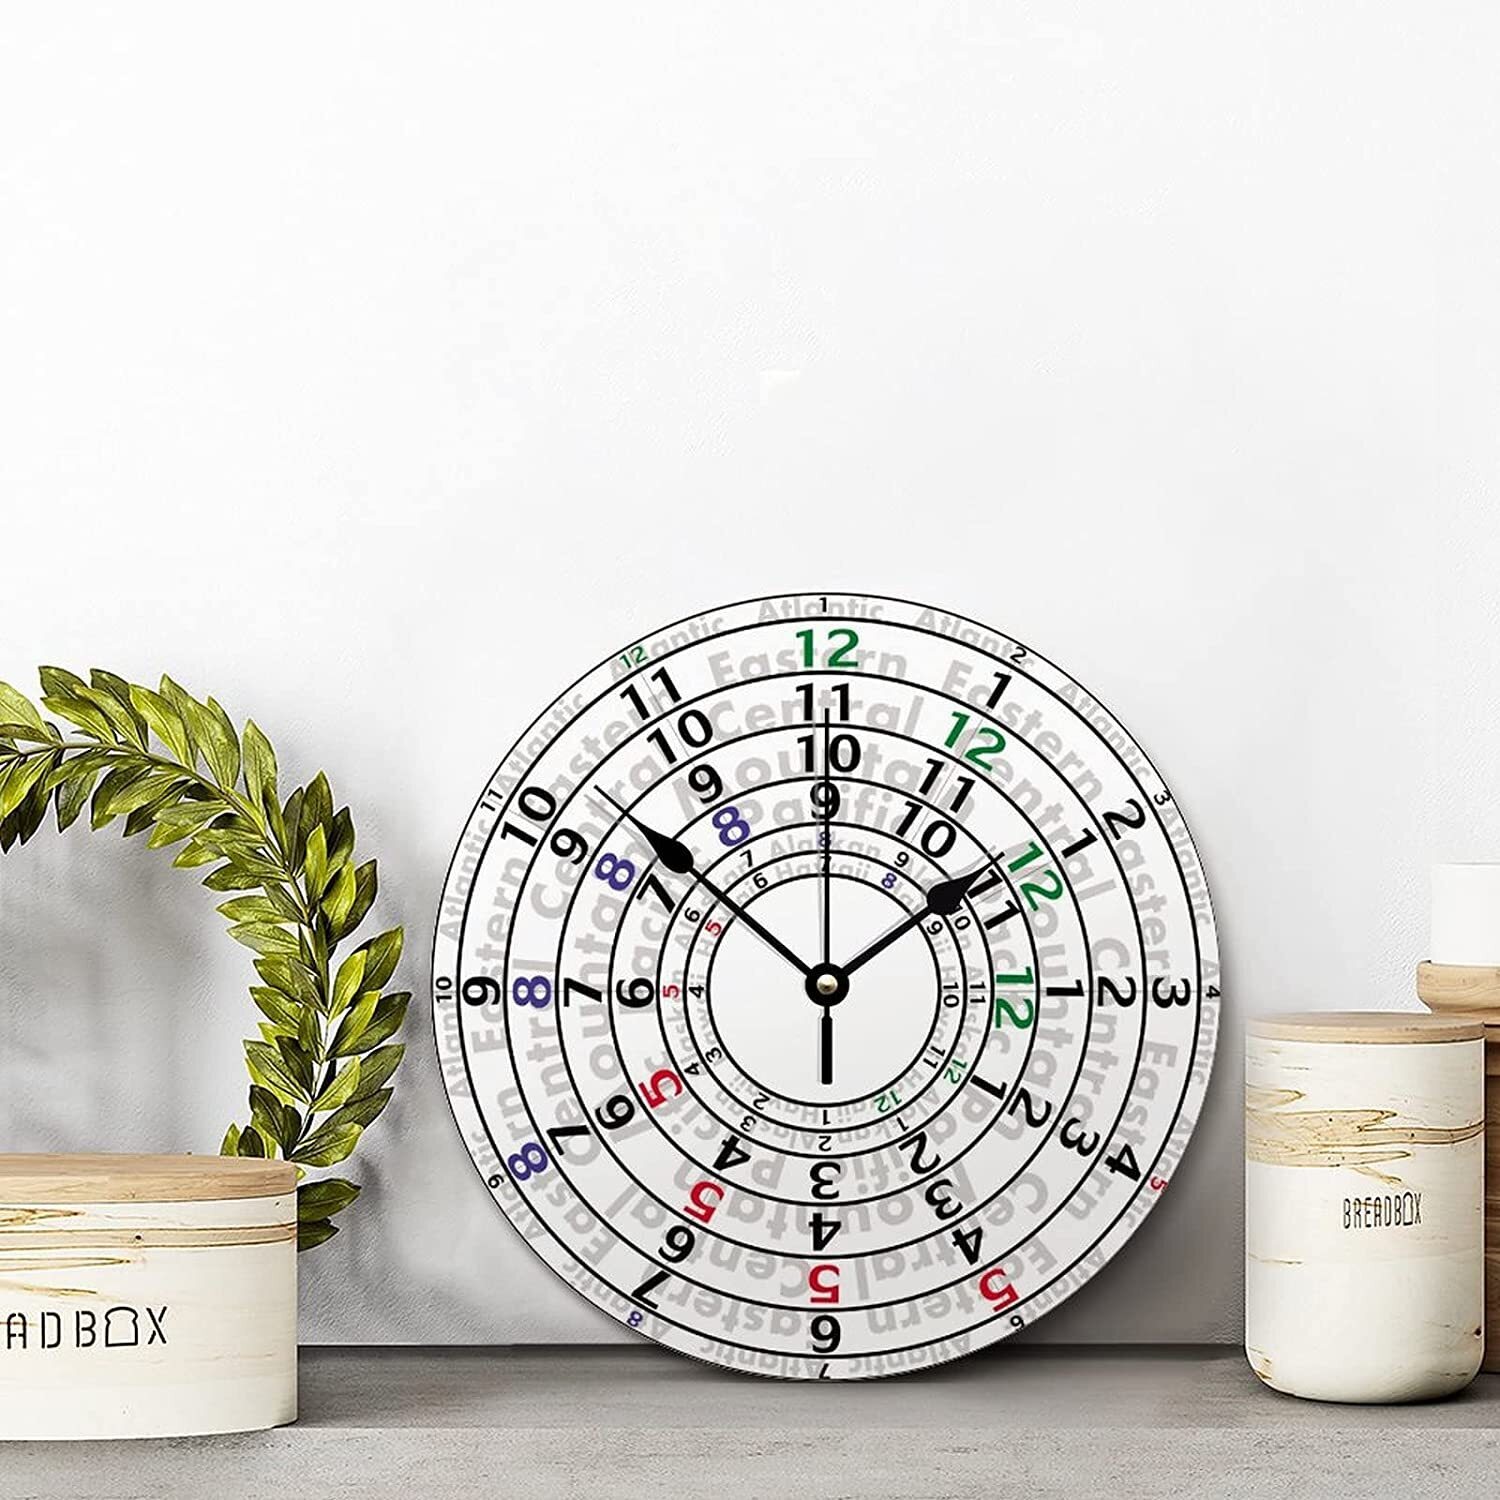 Analog multiple time zone world wall clock